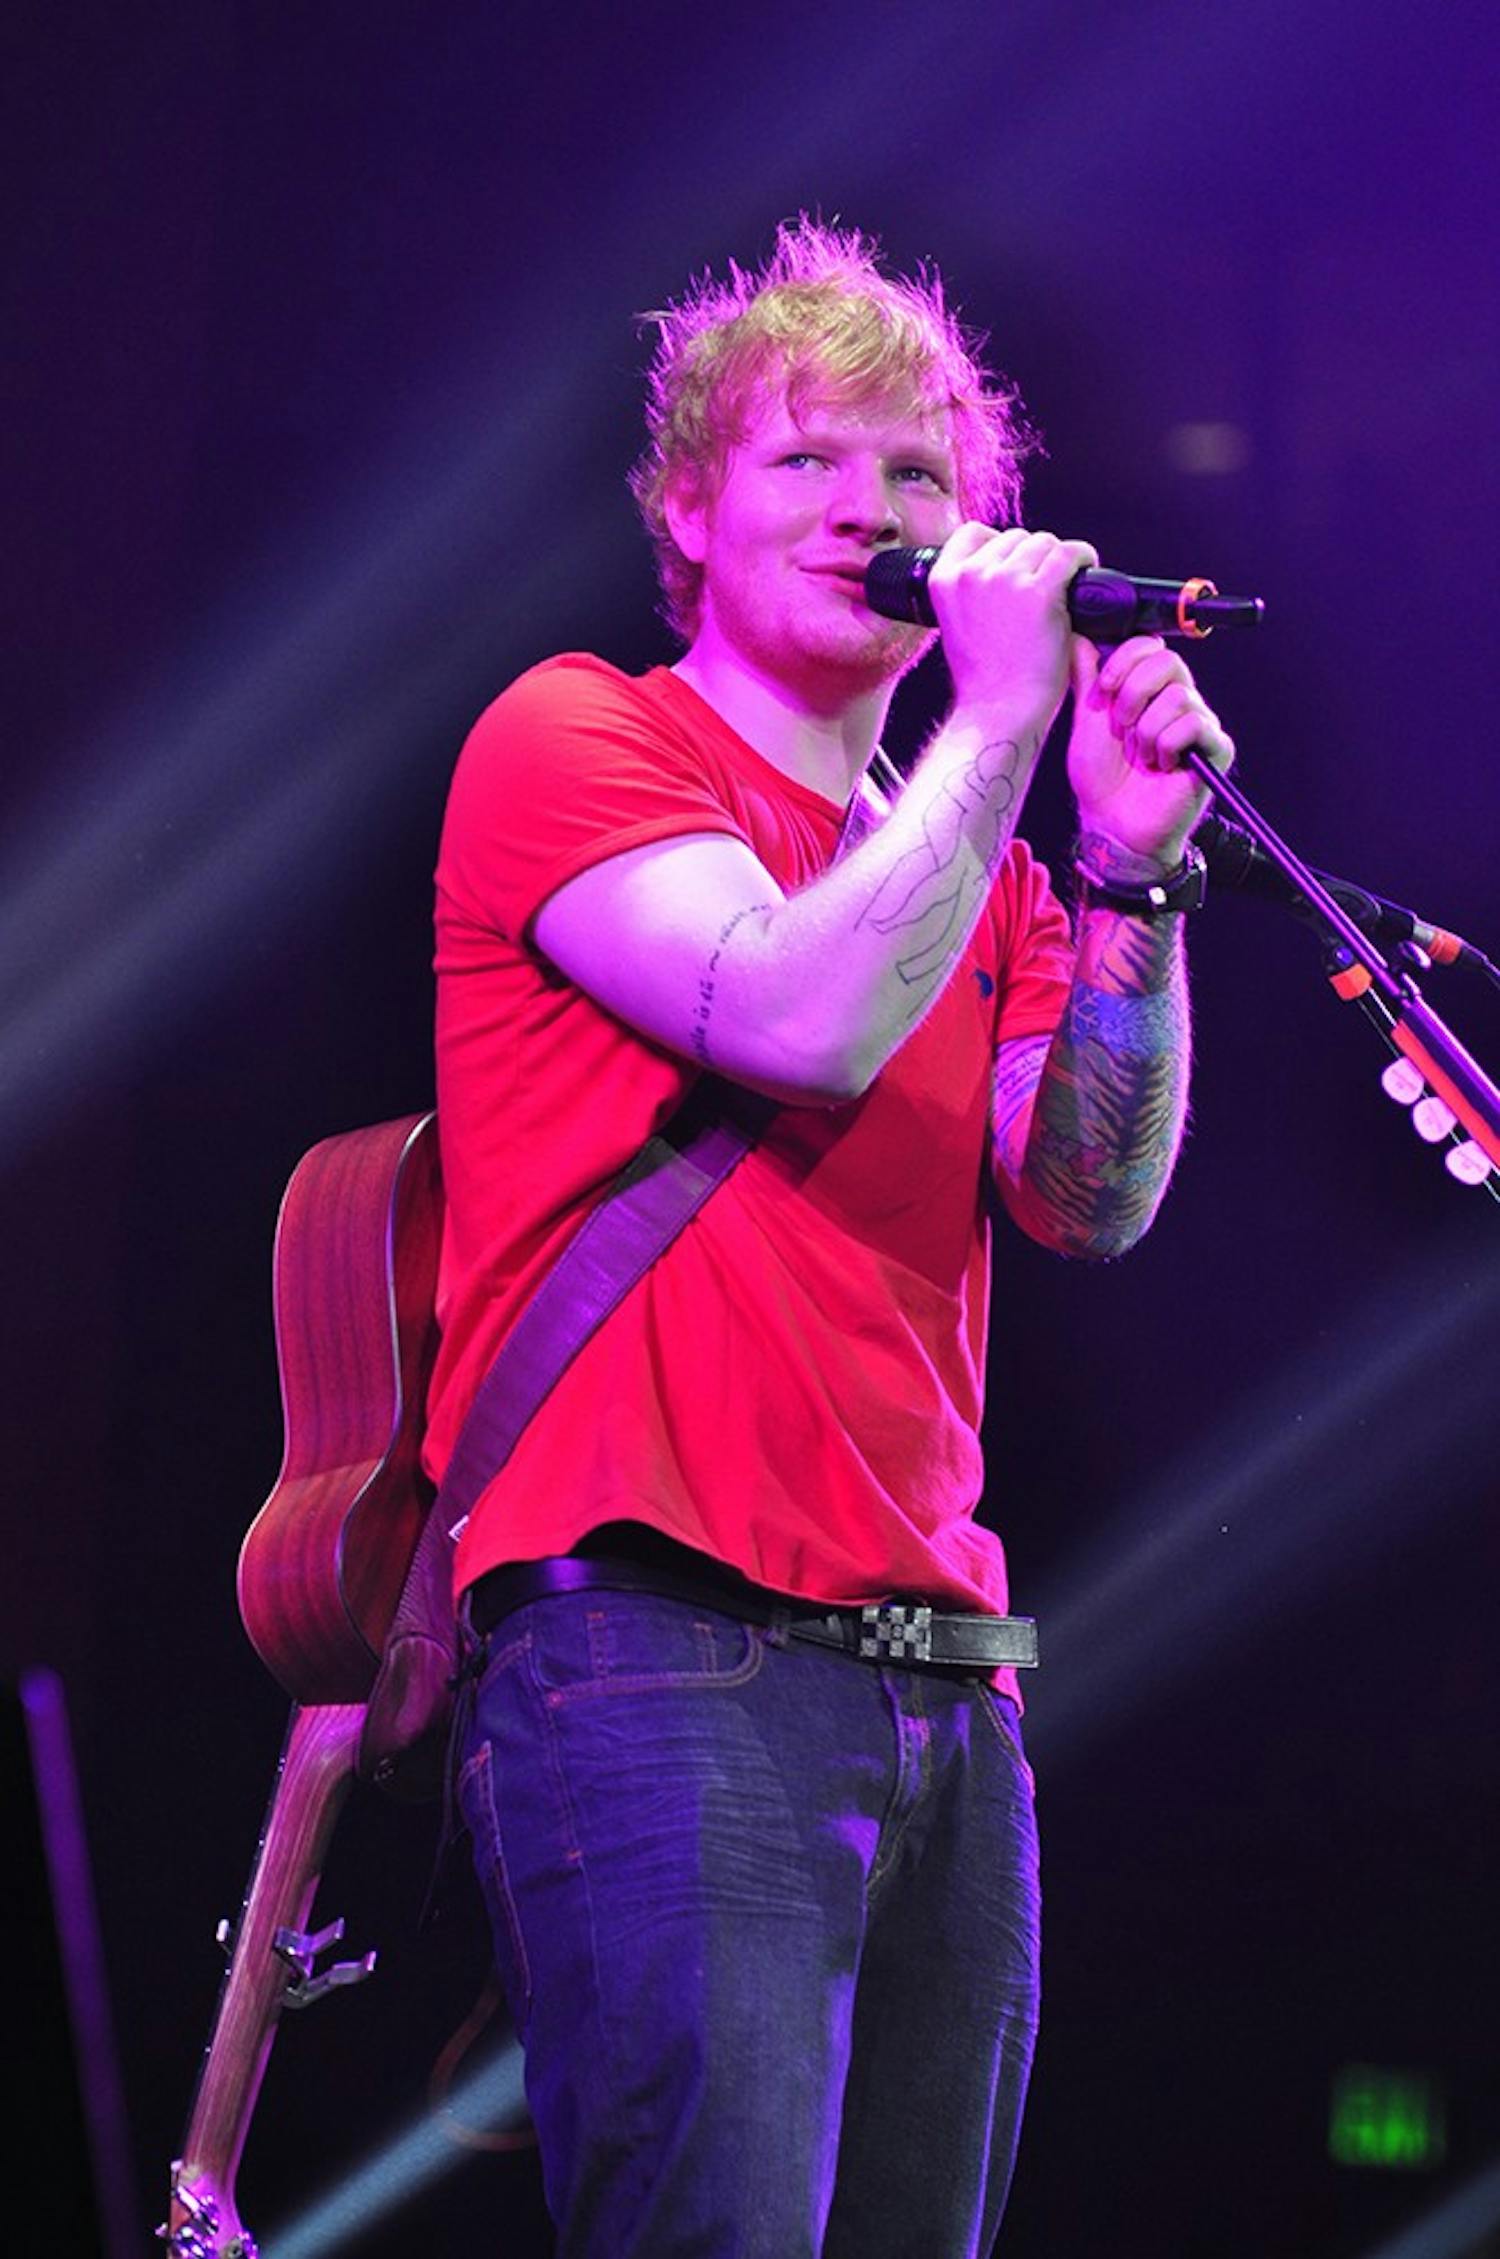 	Ed Sheeran opened the Saturday night show at the Colonial Life Arena.